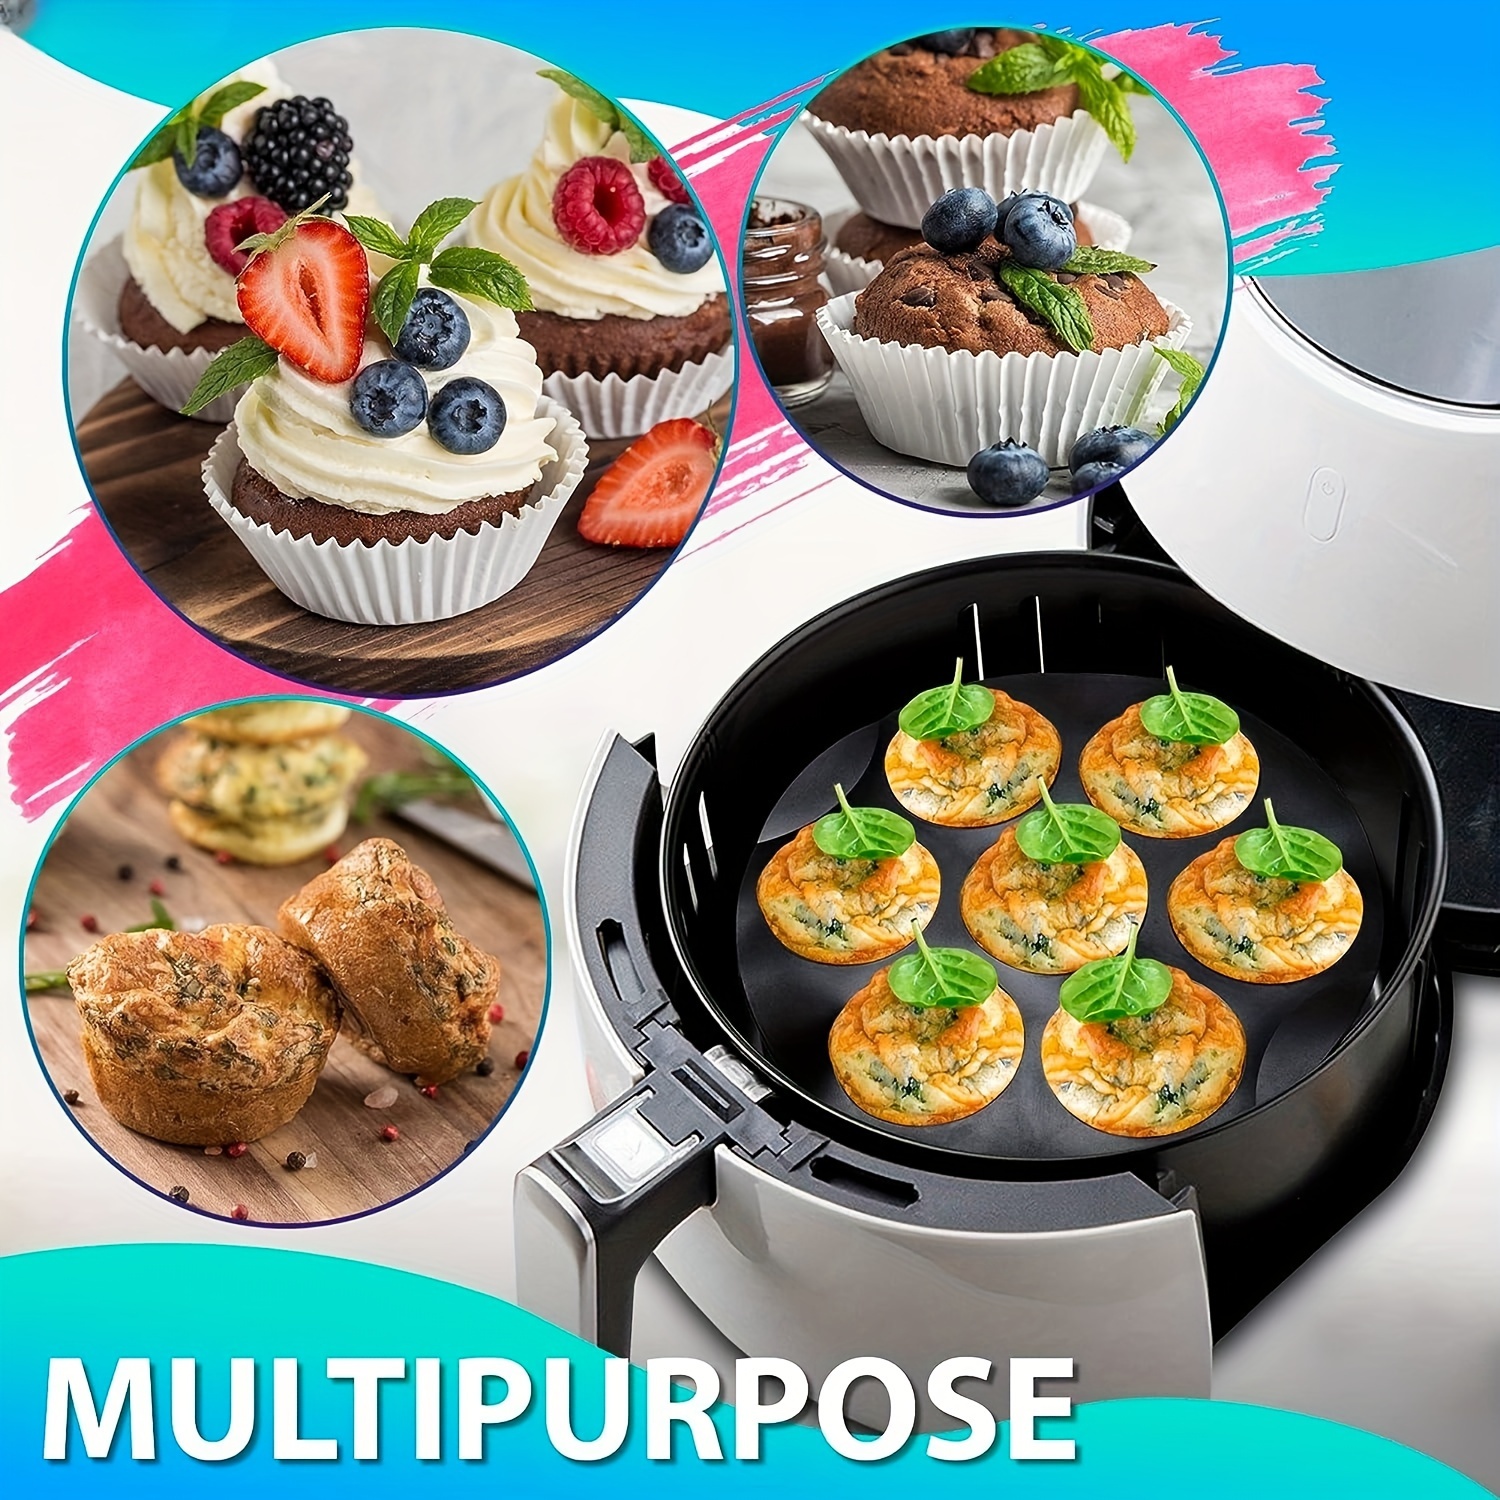 Air Fryer Muffin Pan, Silicone Mini Cupcake Molds, Baking Mold